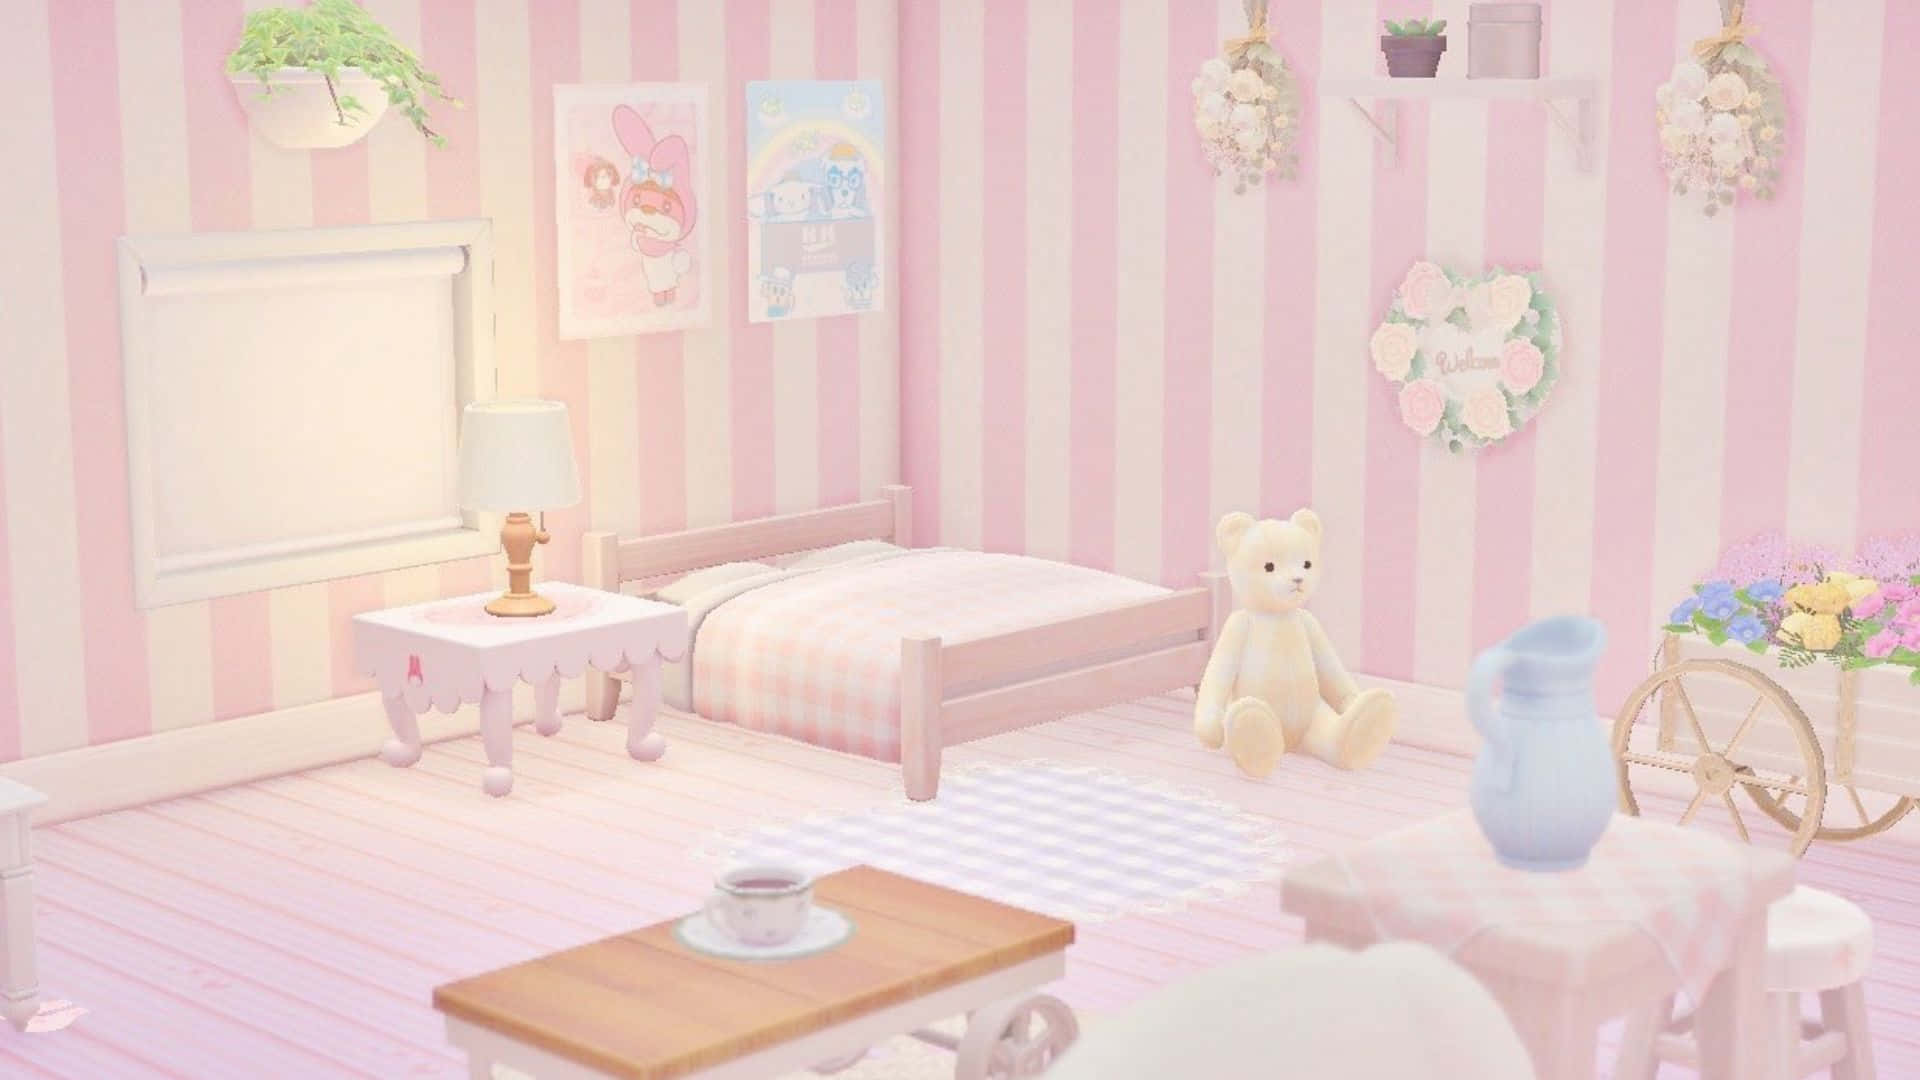 A Cozy and Adorable Kawaii Room Filled with Plushies and Pastel Colors Wallpaper